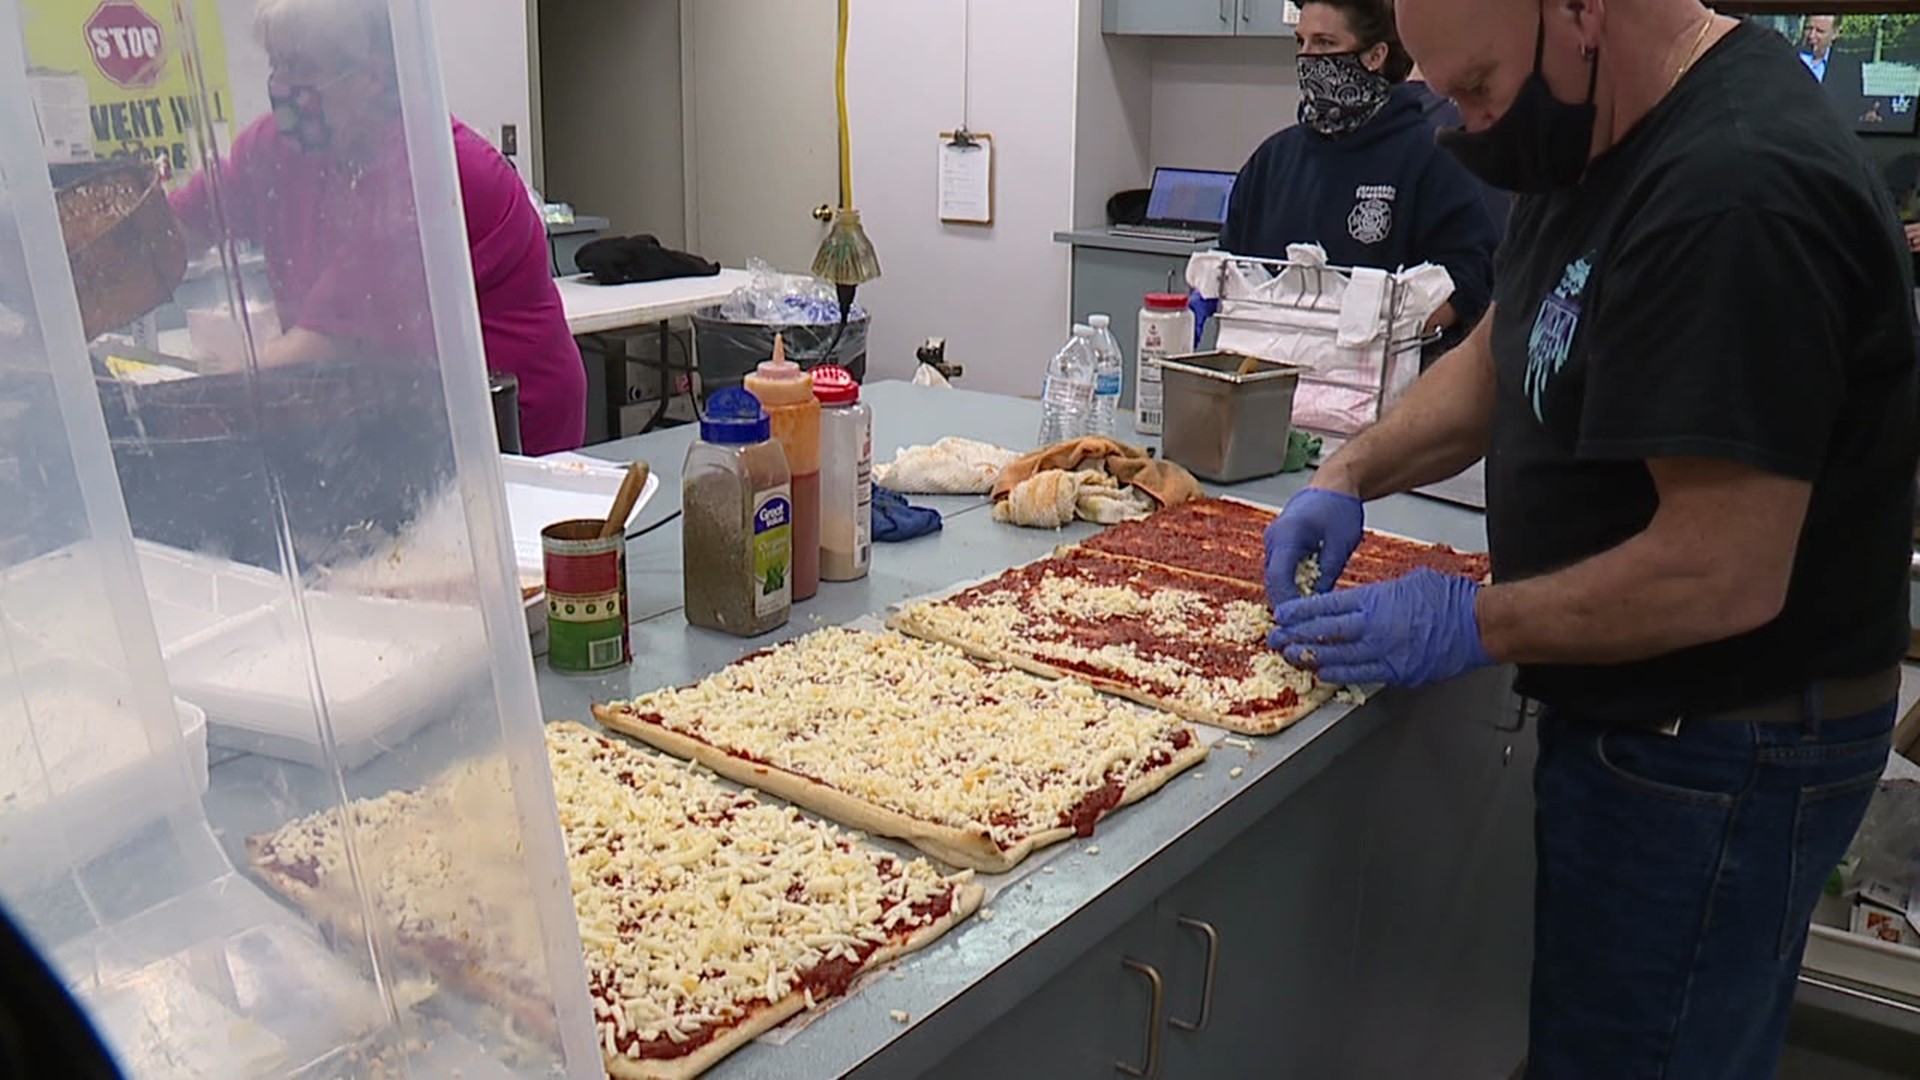 The Jefferson Township Volunteer Fire Company and Pizza L'Oven made sure football fans didn't go hungry during the big game.